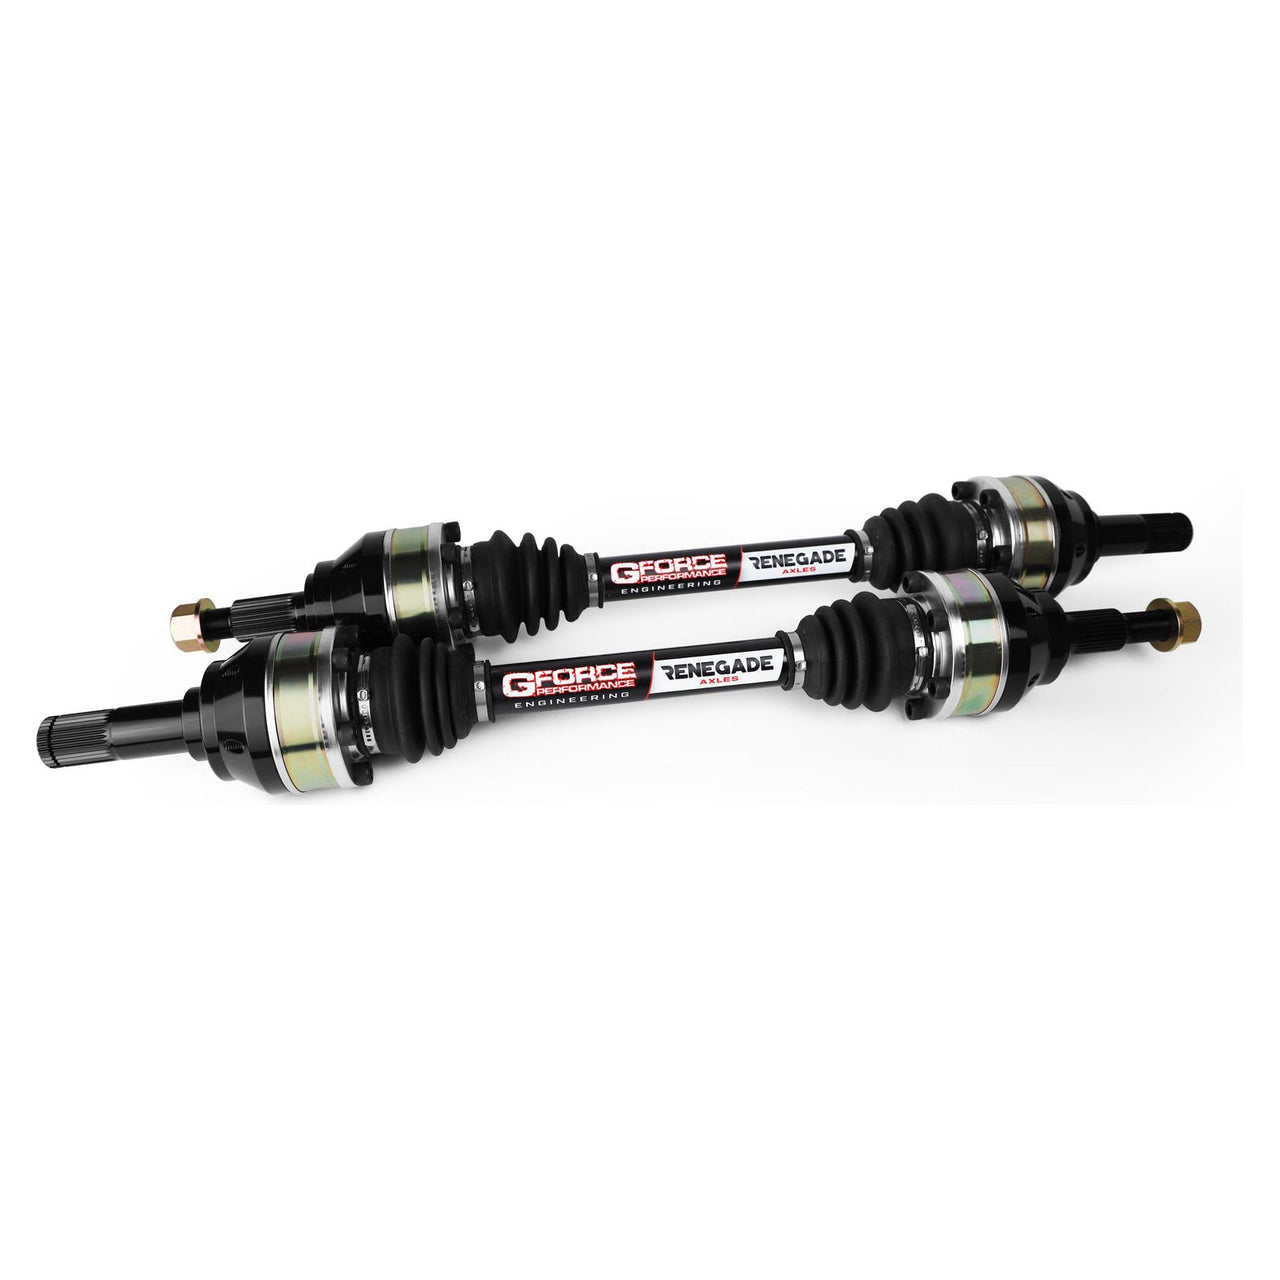 G-FORCE PERFORMANCE G8/SS - VE-VF RENEGADE AXLE SET